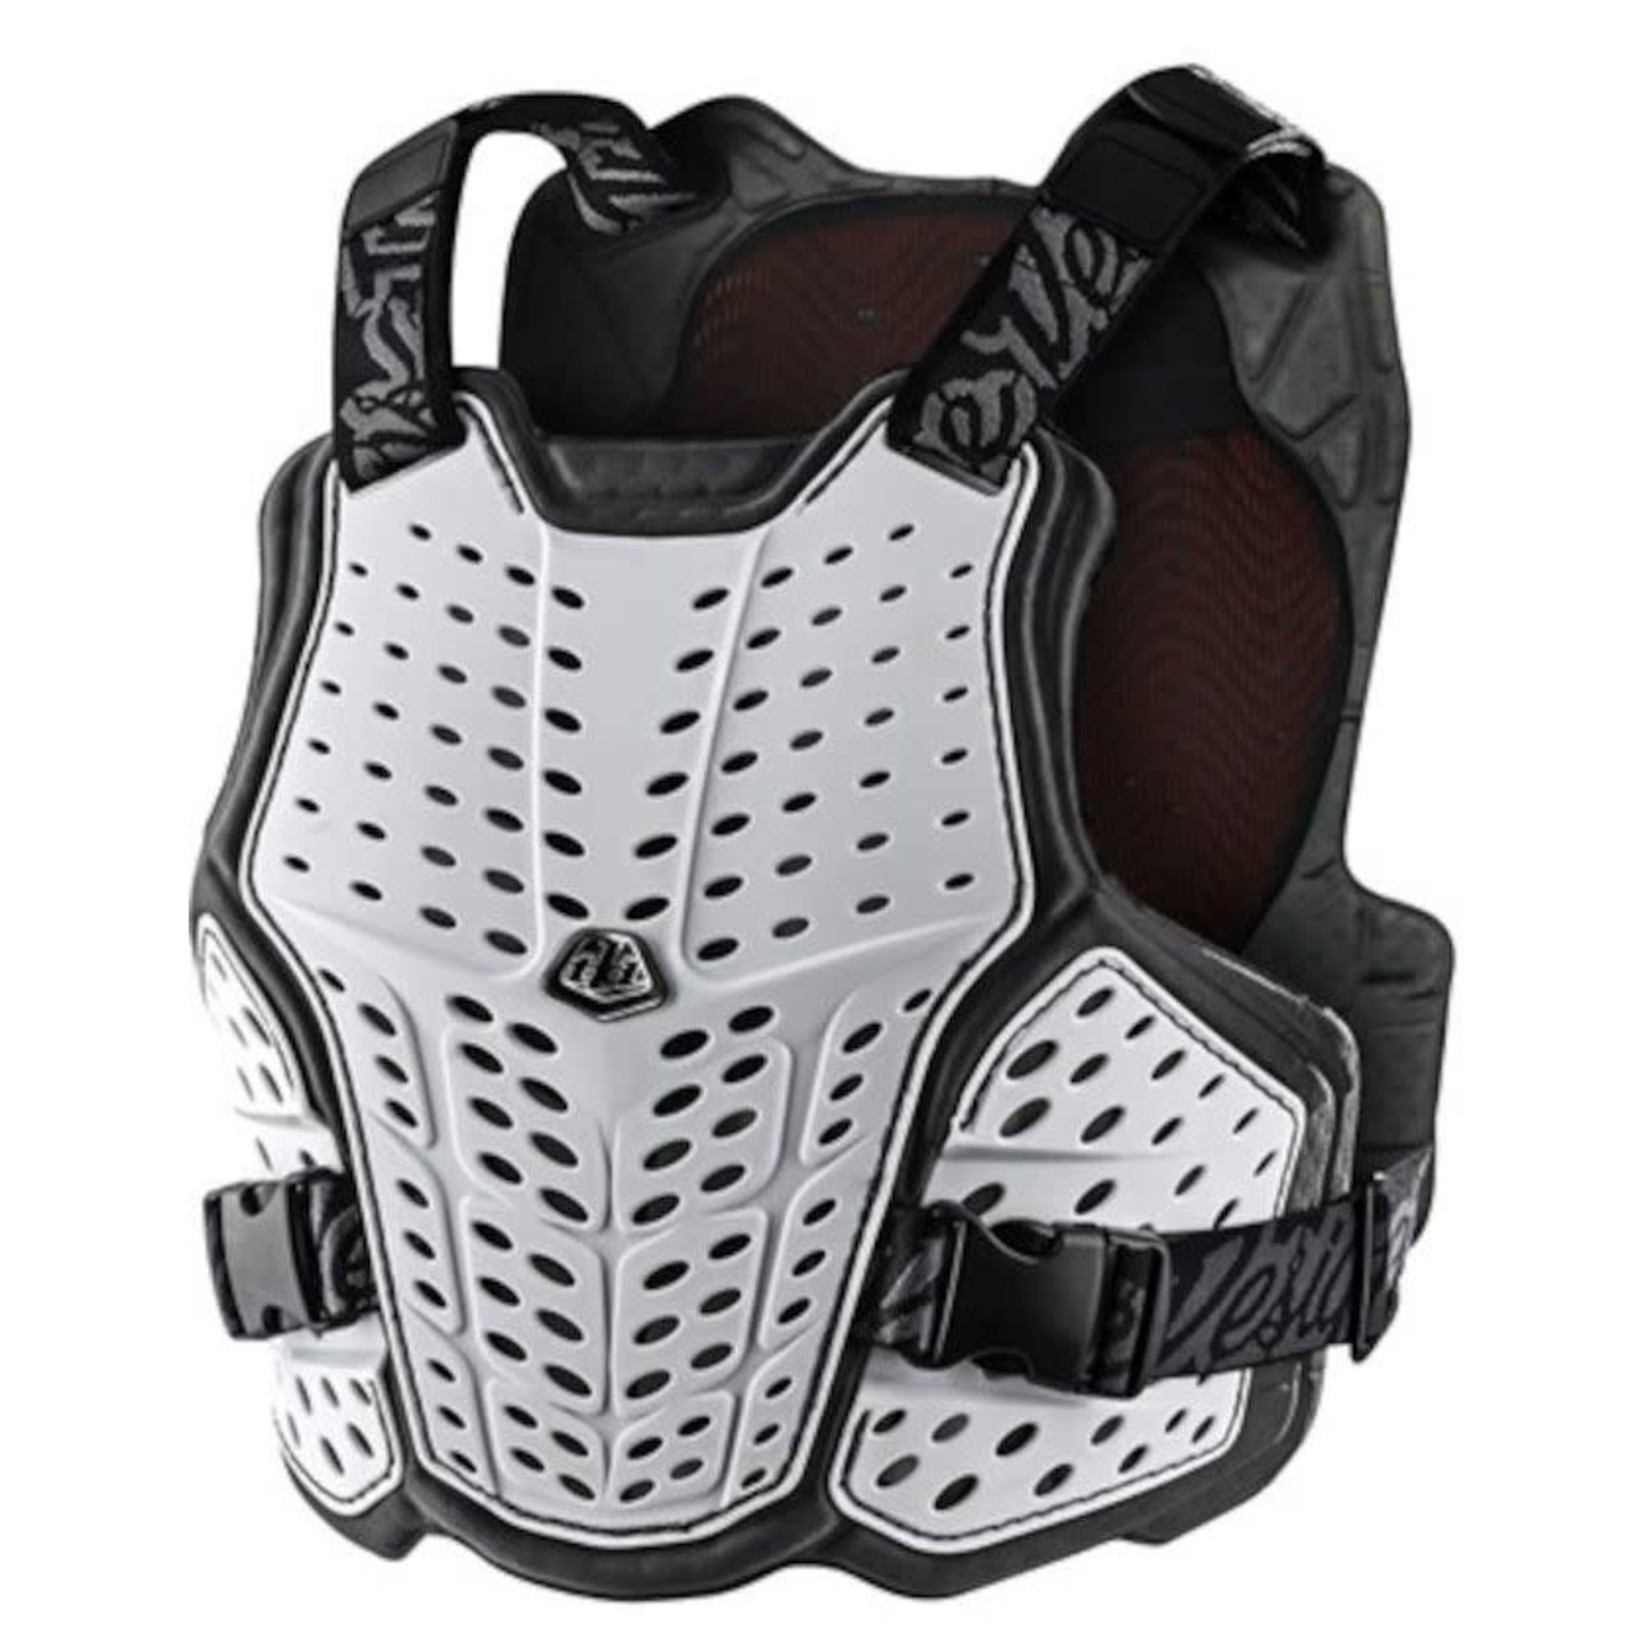 TROY LEE DESIGNS ROCKFIGHT CE FLEX CHEST PROTECTOR YOUTH OSFA